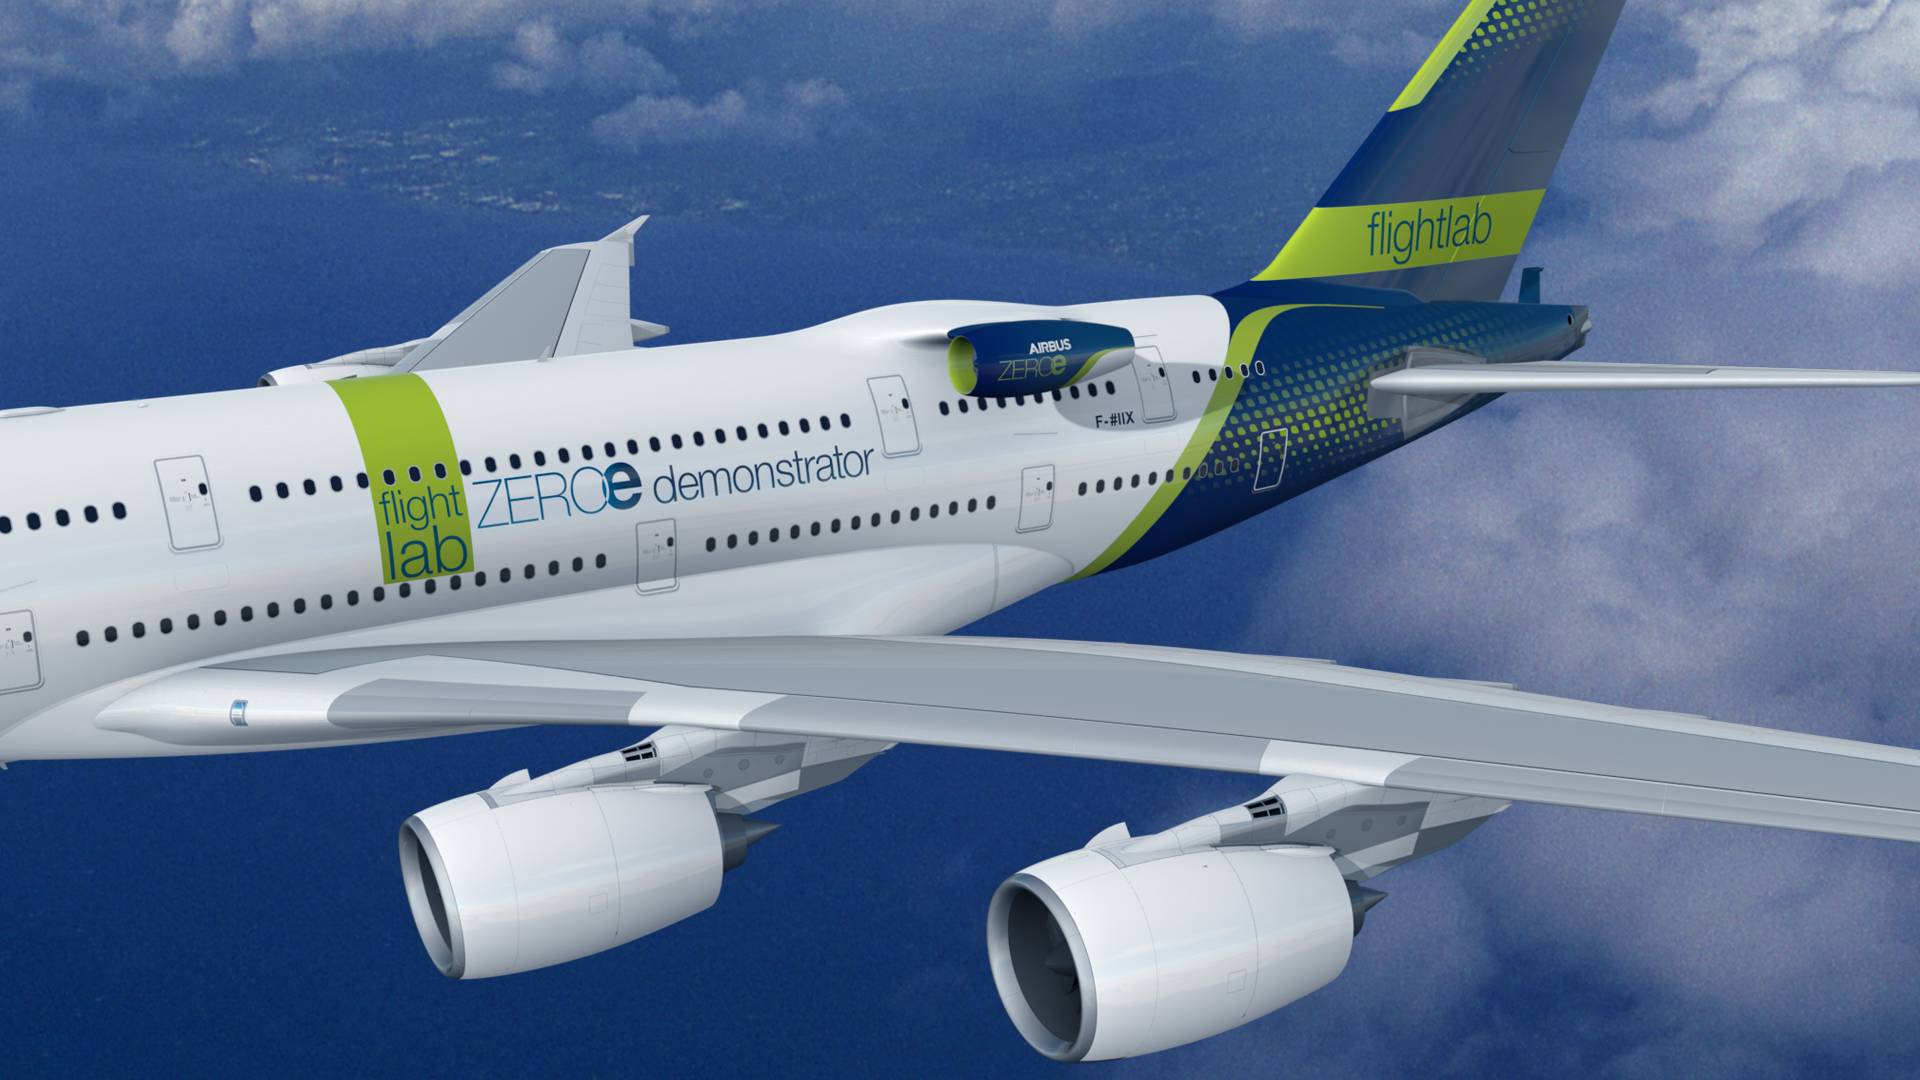 First Airbus Hydrogen Aircraft: Combustion Or Fuel Cell?